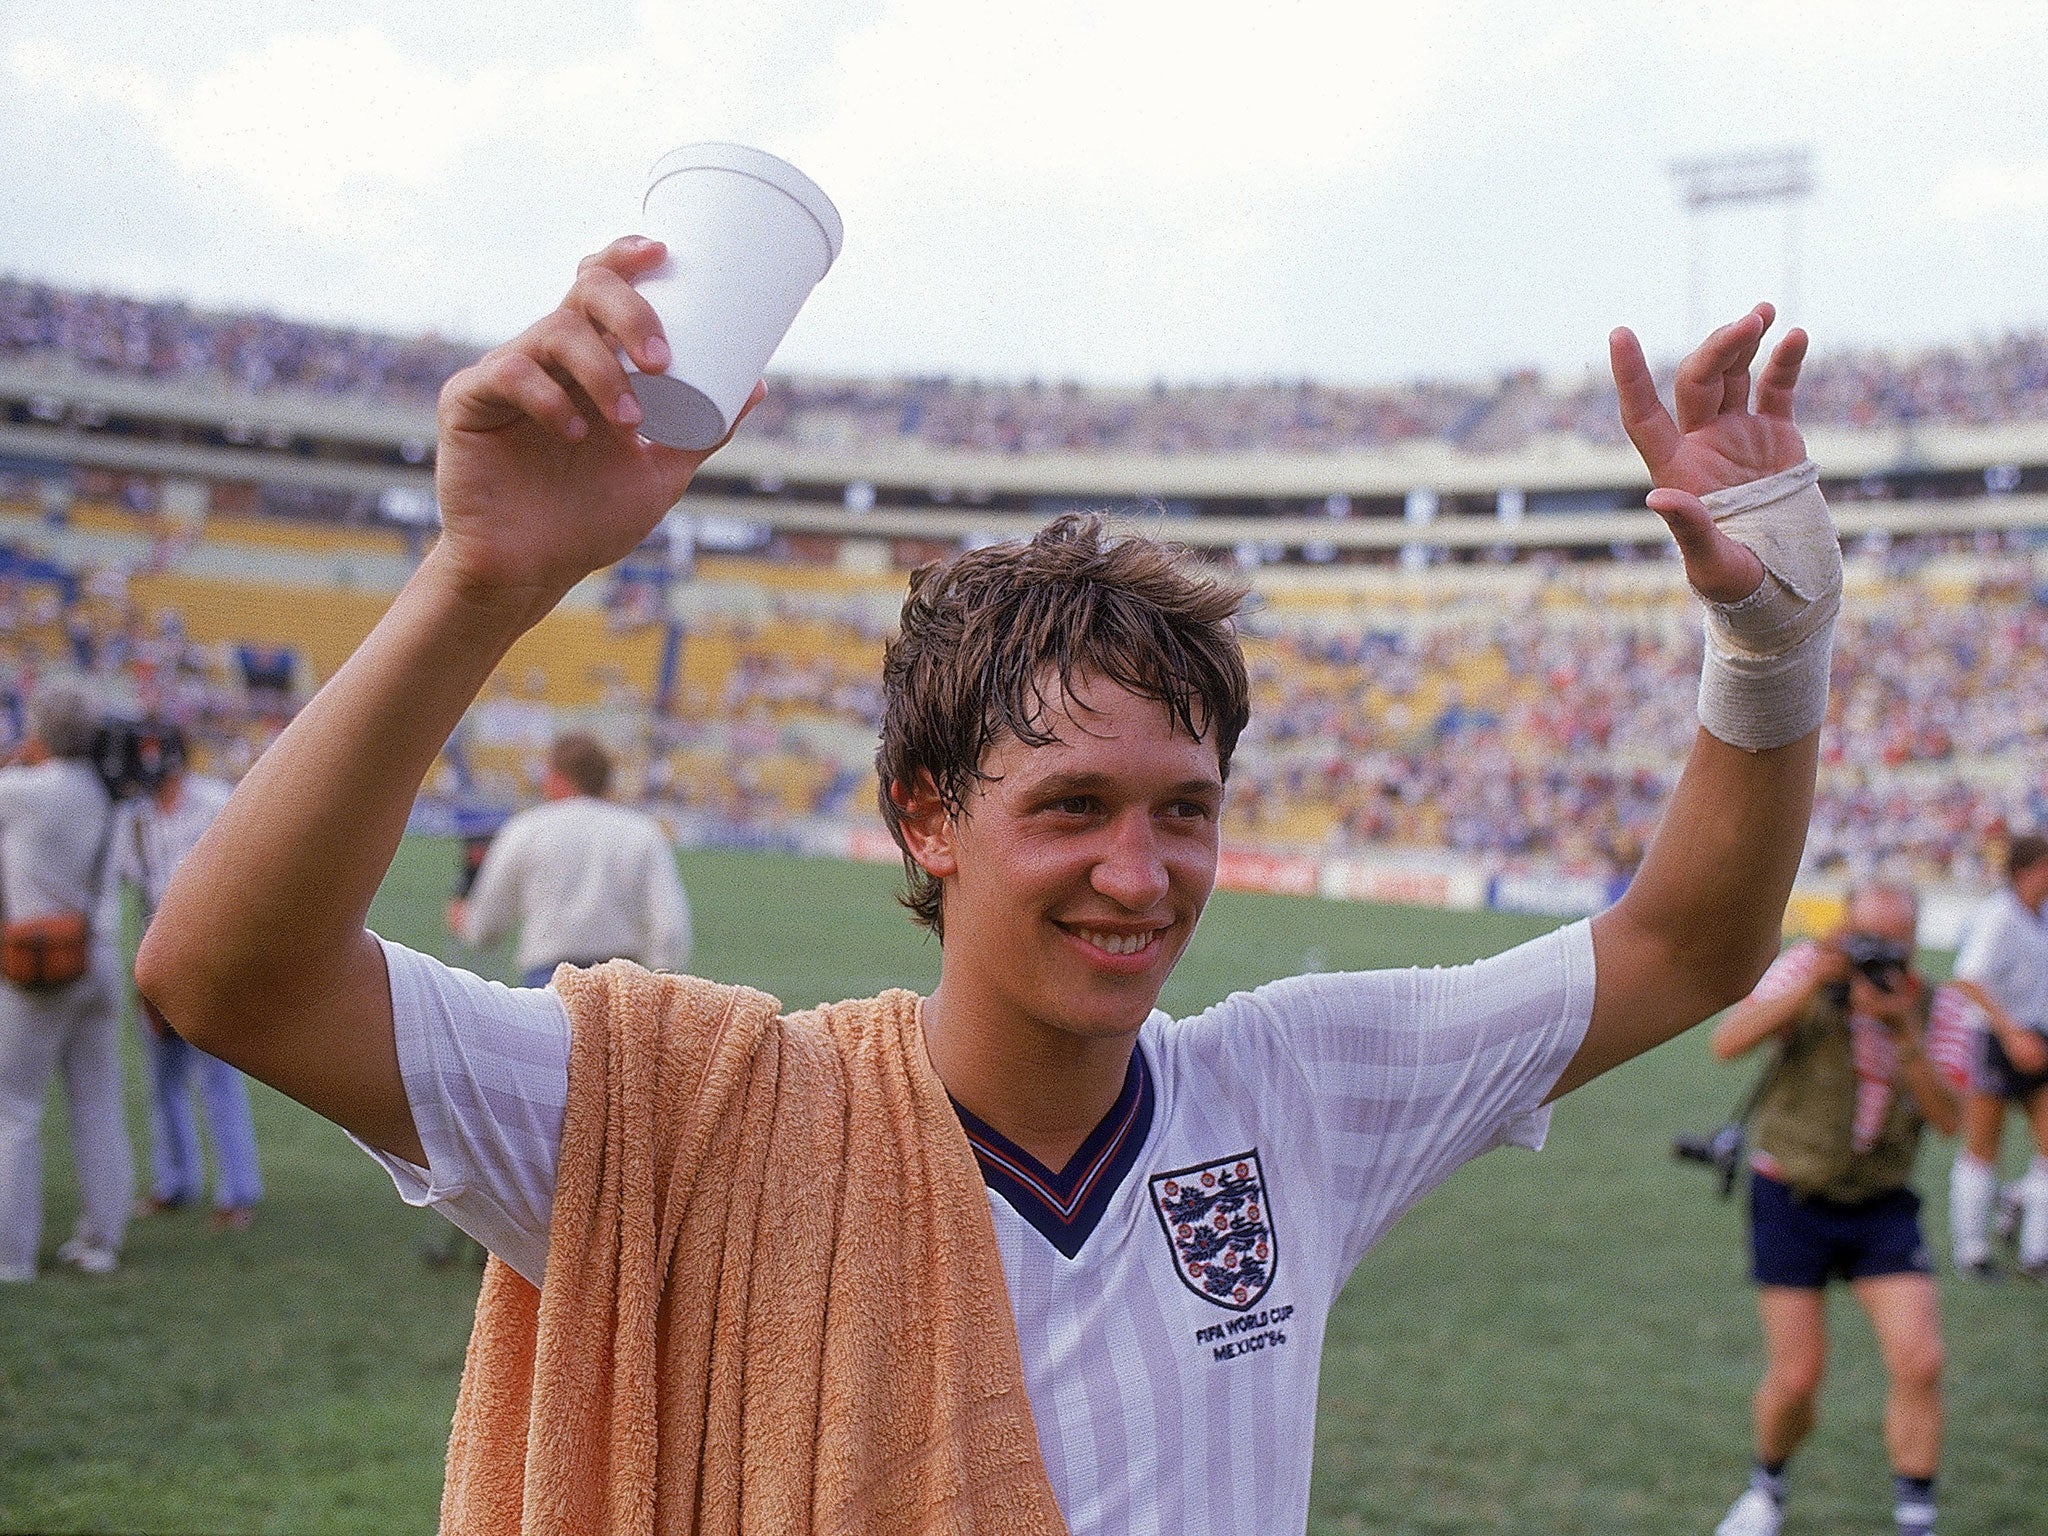 Lineker became a household name after his 1986 heroics